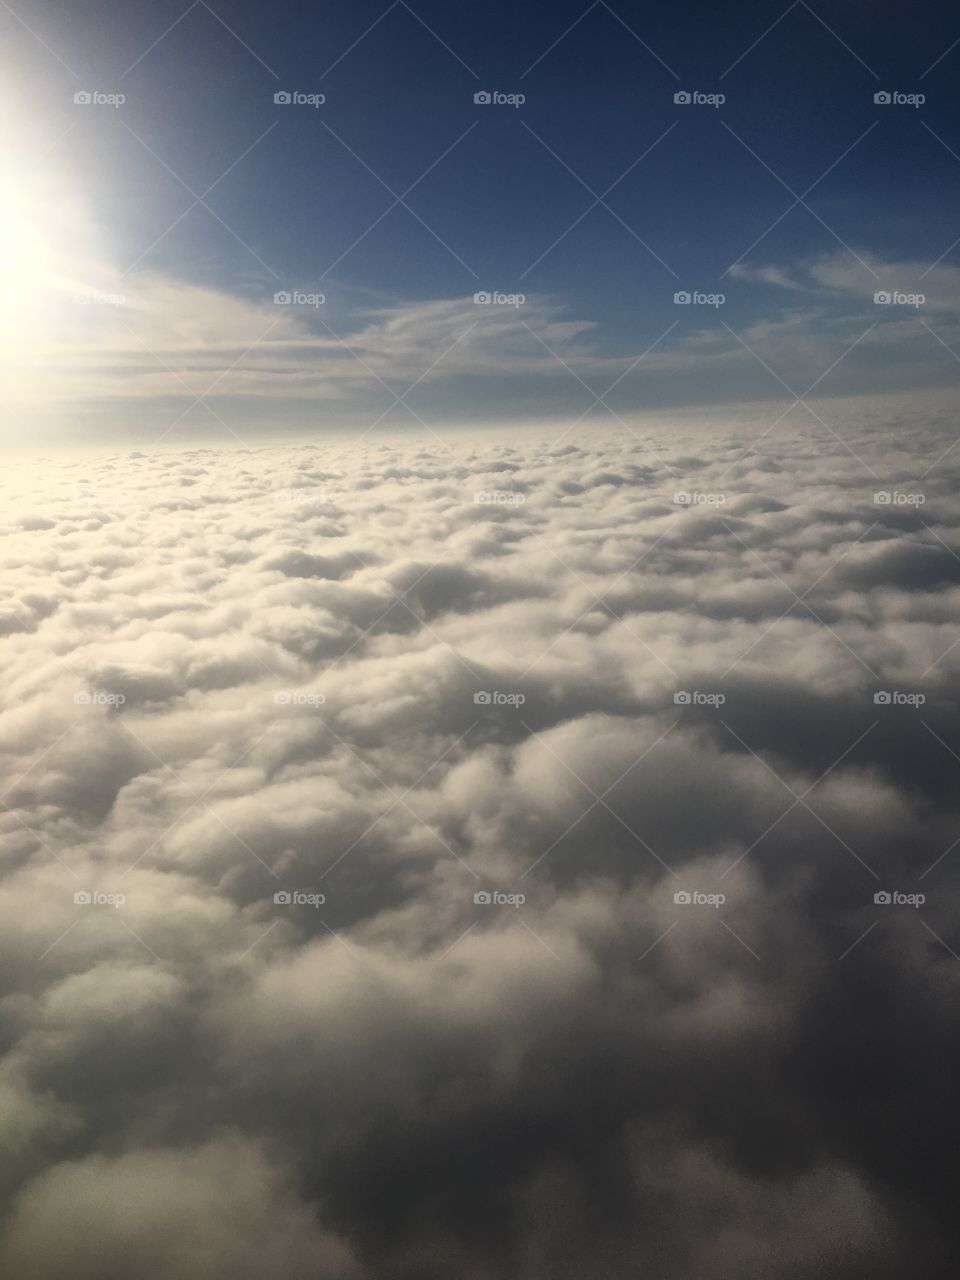 Clouds from an airplane.